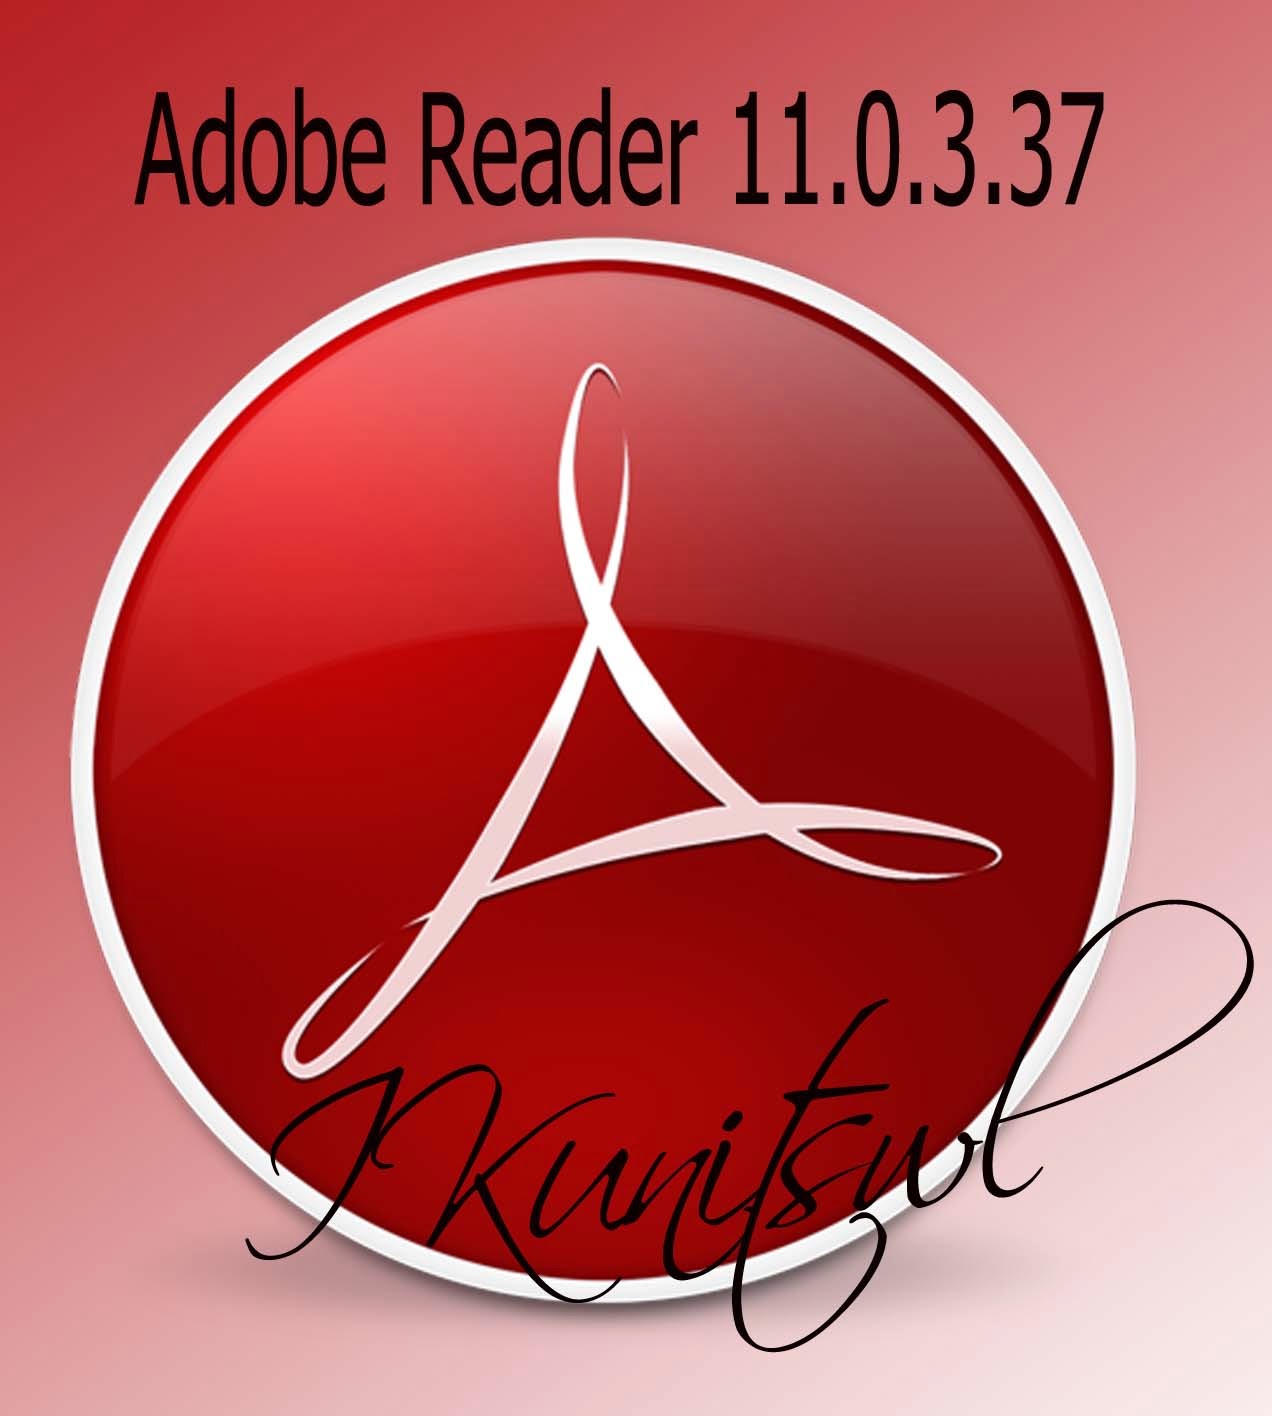 adobe reader download free for windows xp professional